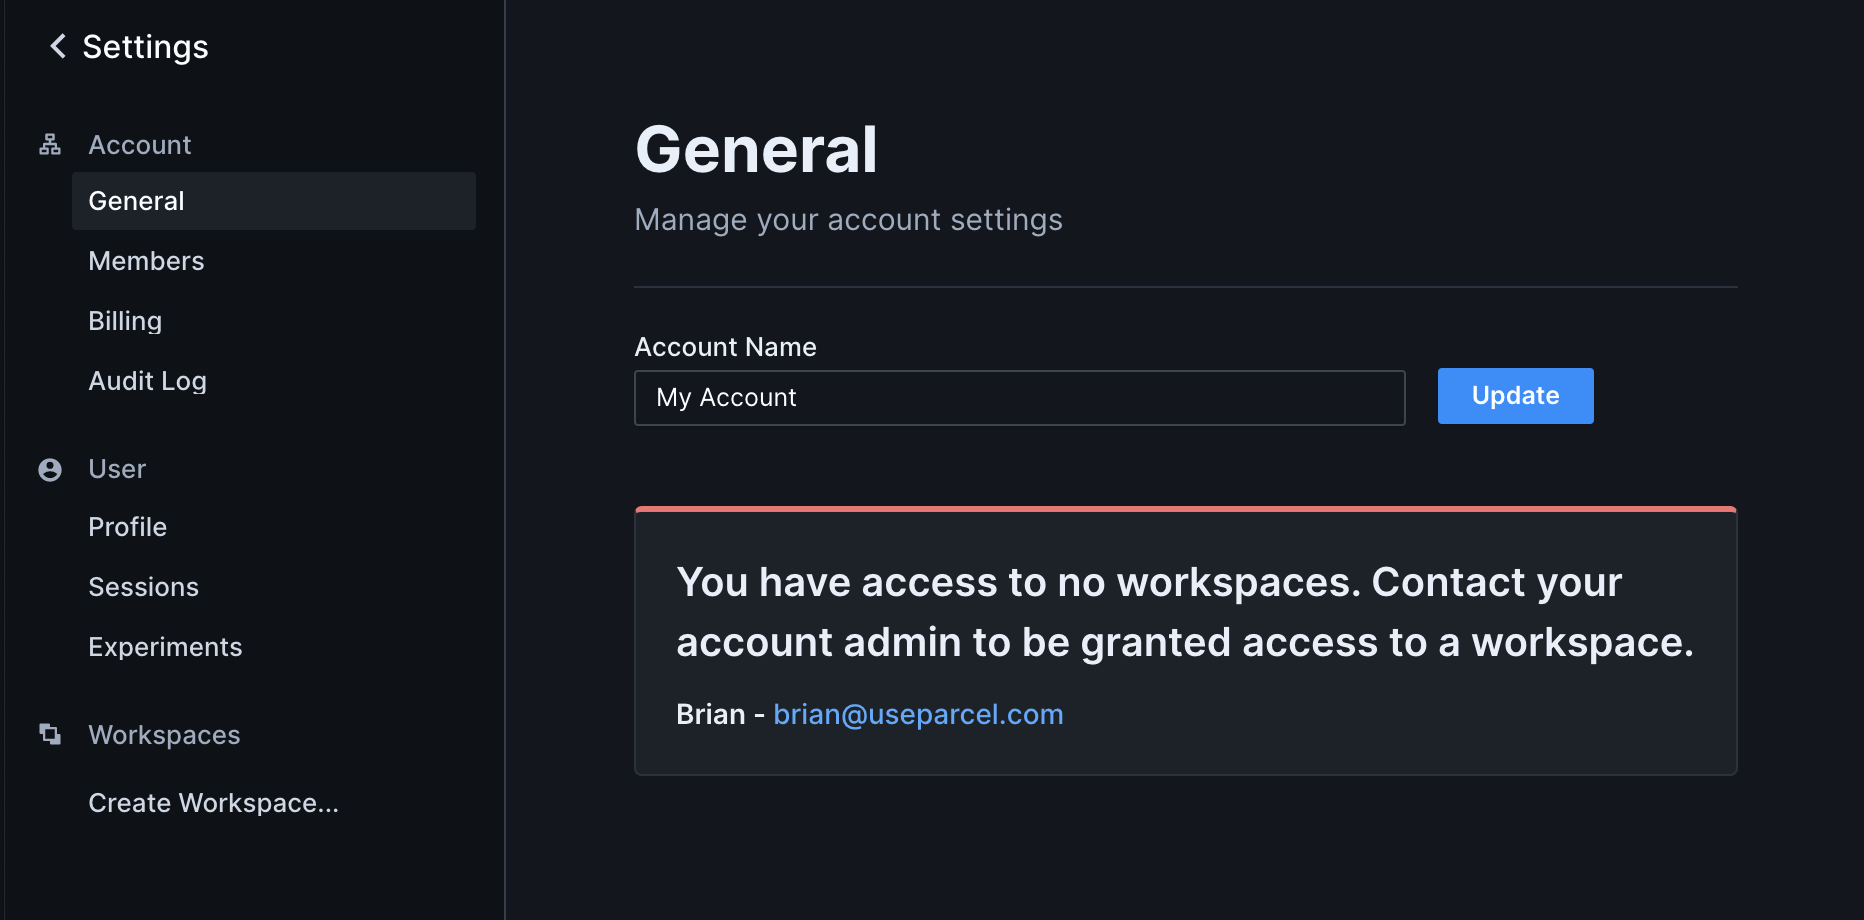 Image of the general account settings page that a user without workspaces would see. The left sidebar has navigation items for other settings pages. The main page has a large message reading "You have access to no workspaces. Contact your account admin to be granted access to a workspace". Below is a list of account admins' names and email addresses.